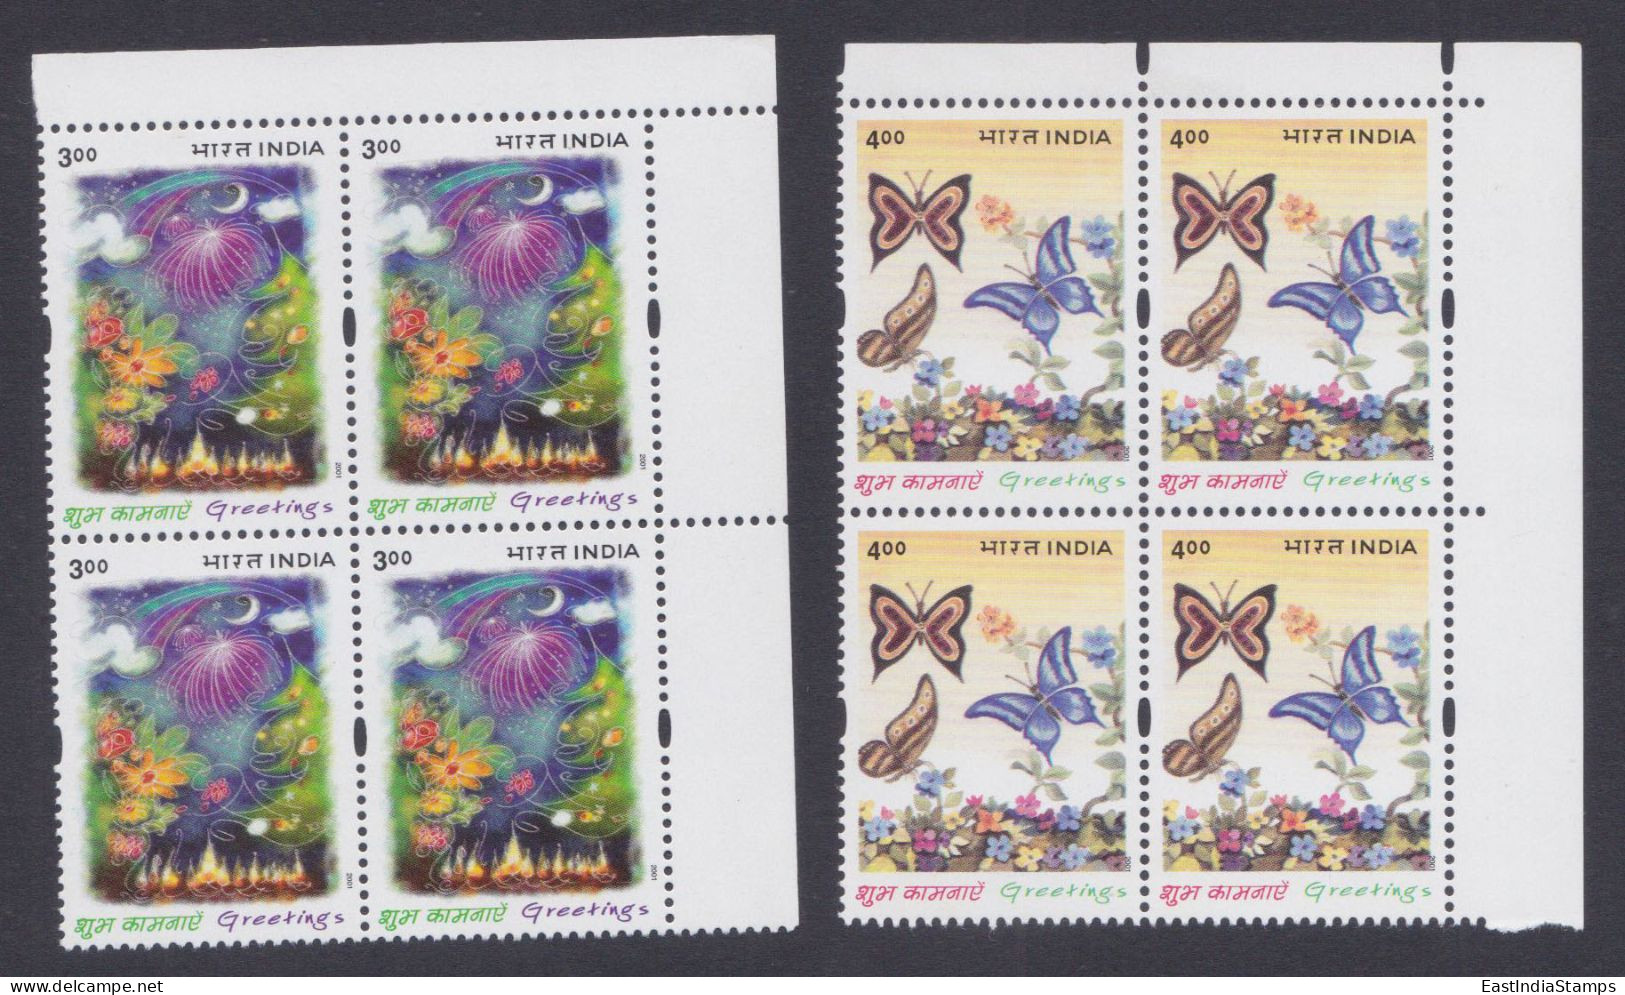 Inde India 2001 MNH Greetings, Butterfly, Butterflies, Flower, Flowers, Stars, Lights, Festivals, Block - Nuovi